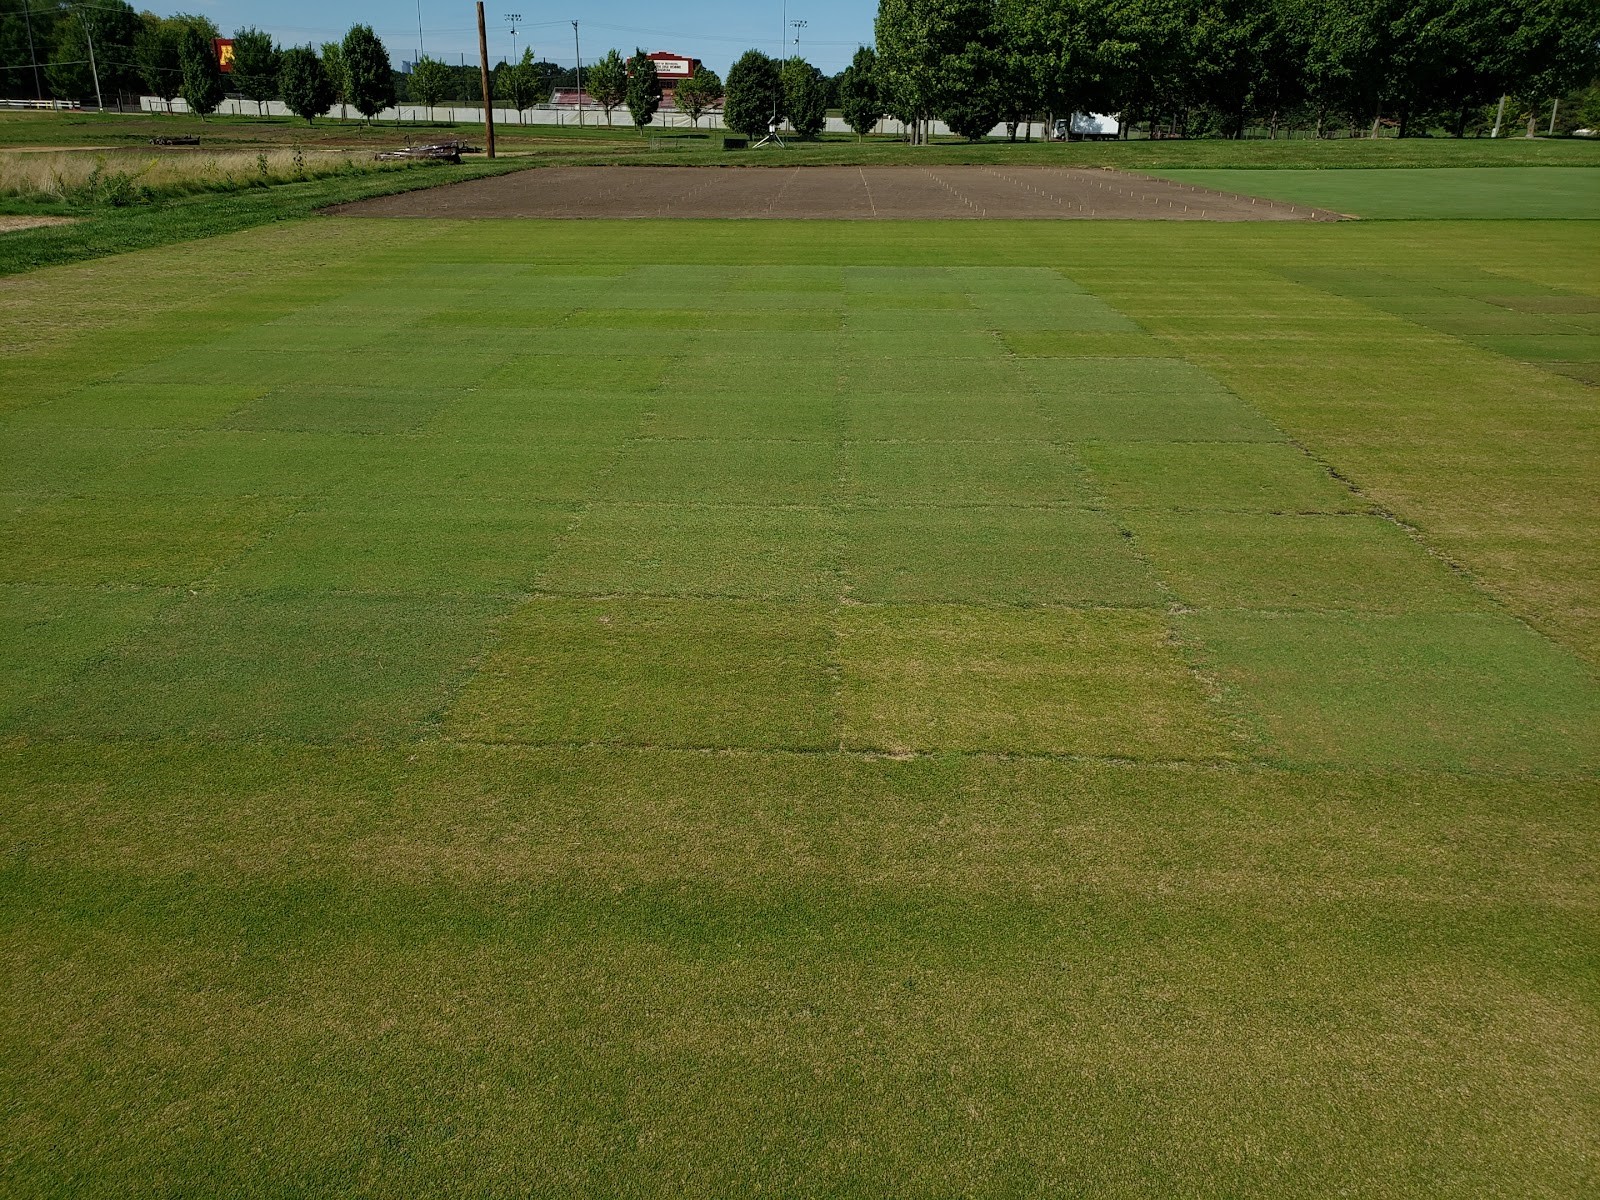 Putting green research plots at the University of Minnesota in September